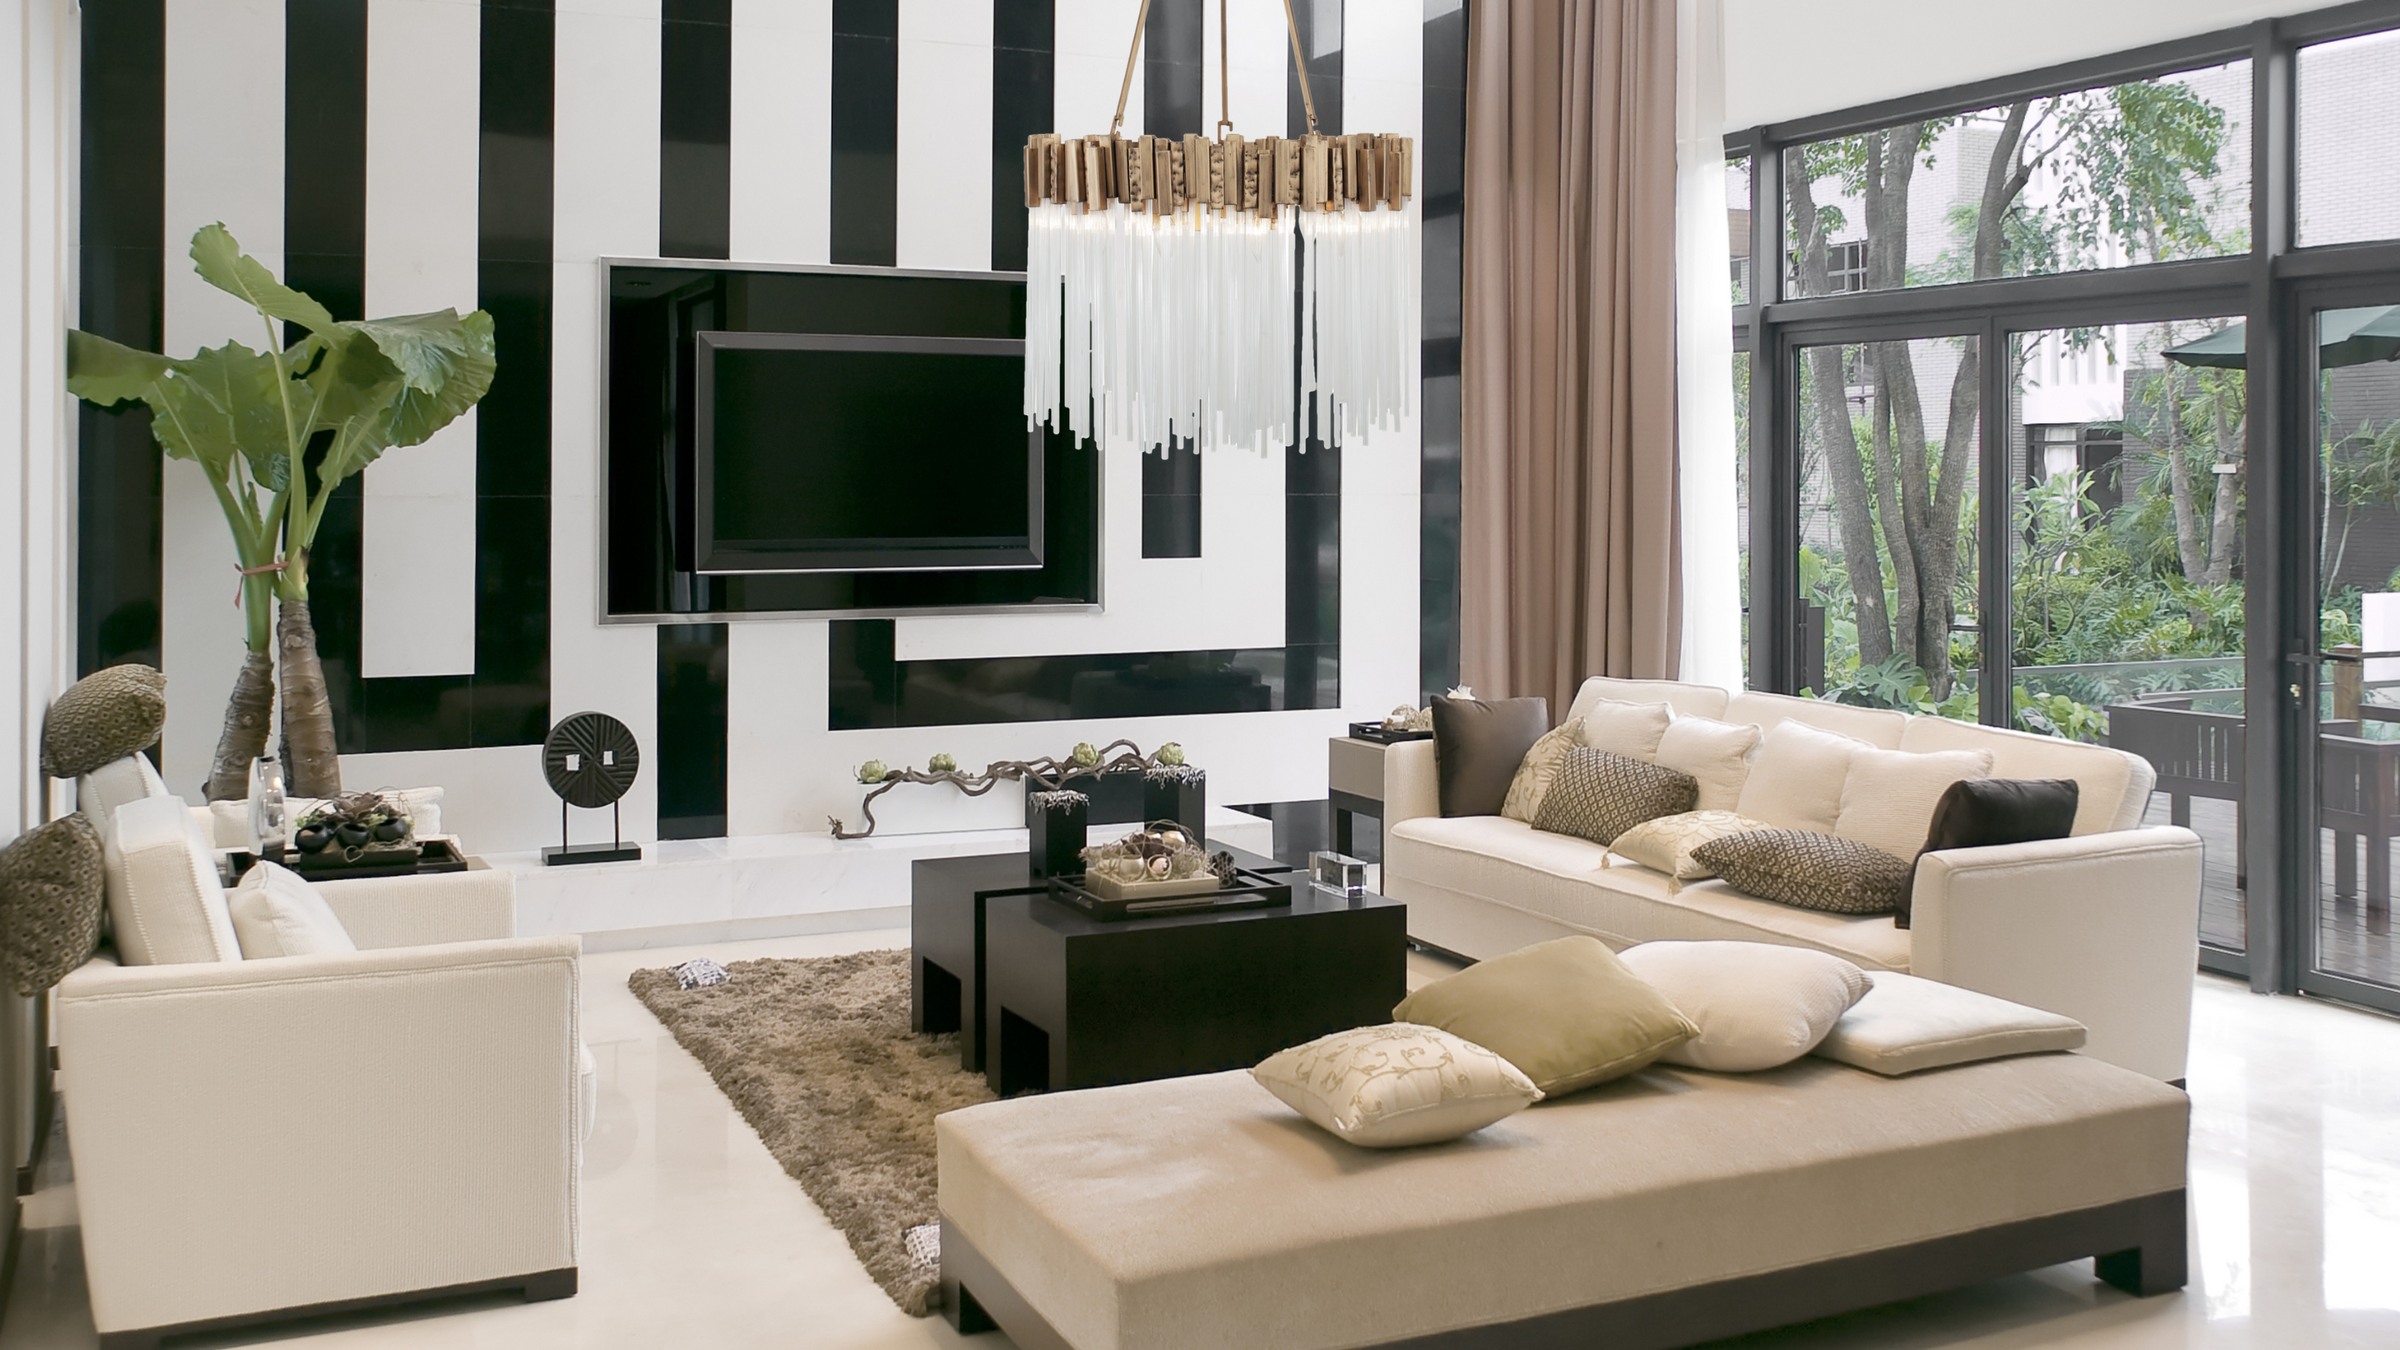 Matrix pendant shown in large living room with a black and white statement wall